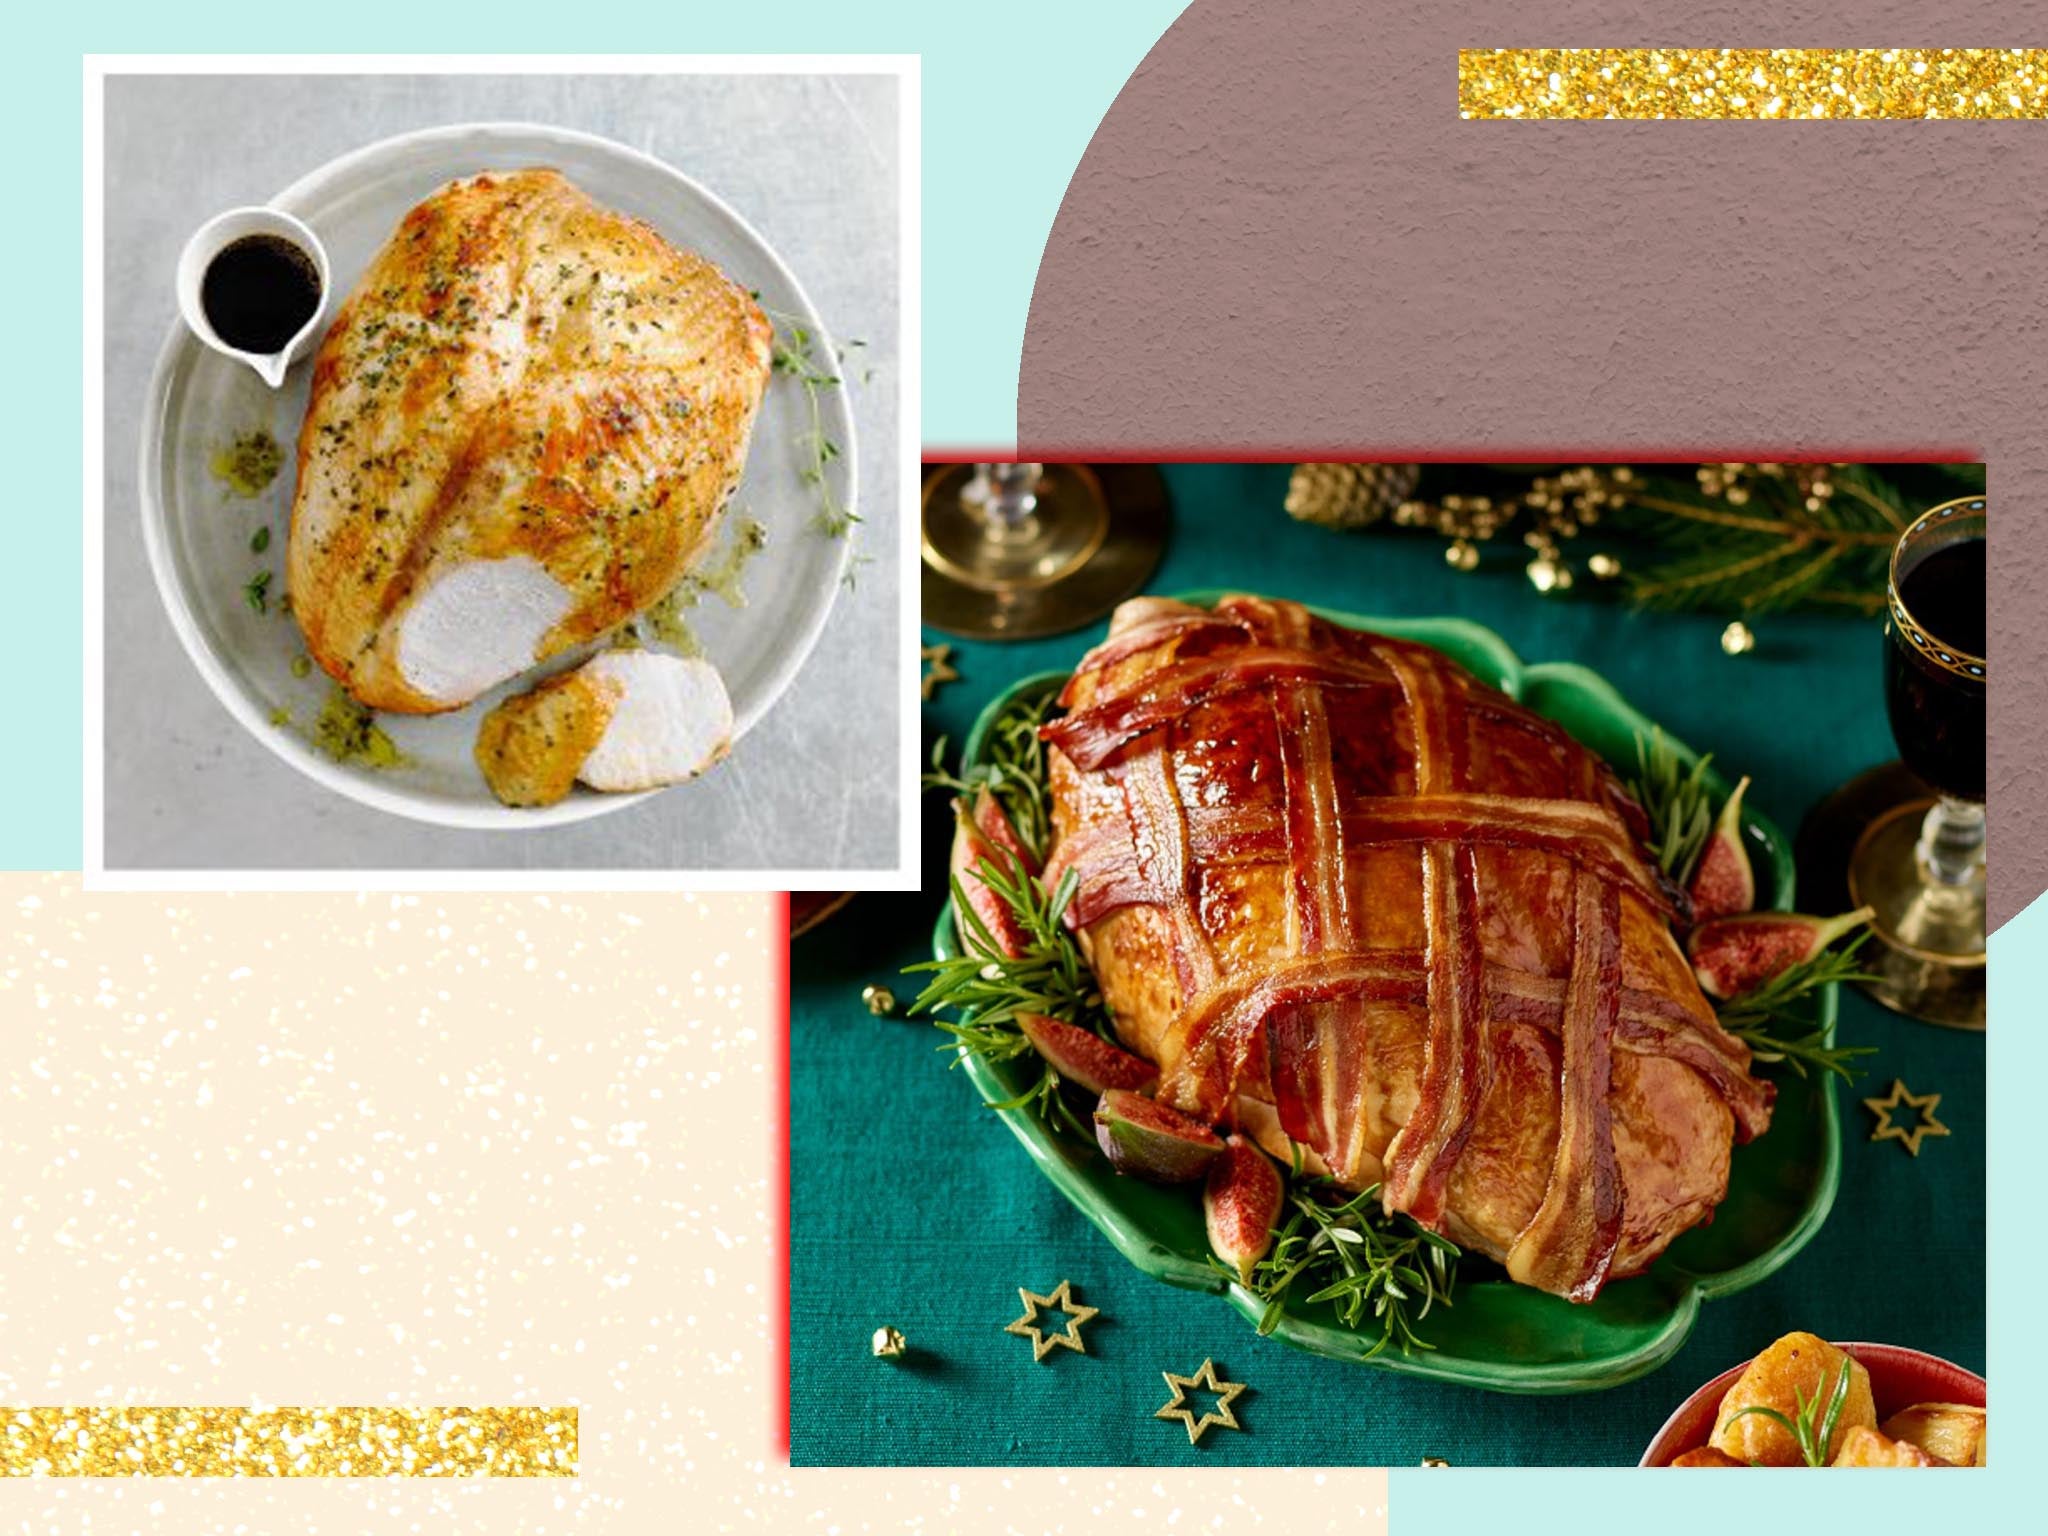 We prepared each bird the way you would at Christmastime, with the full retinue of sides, cranberry sauces and gravies